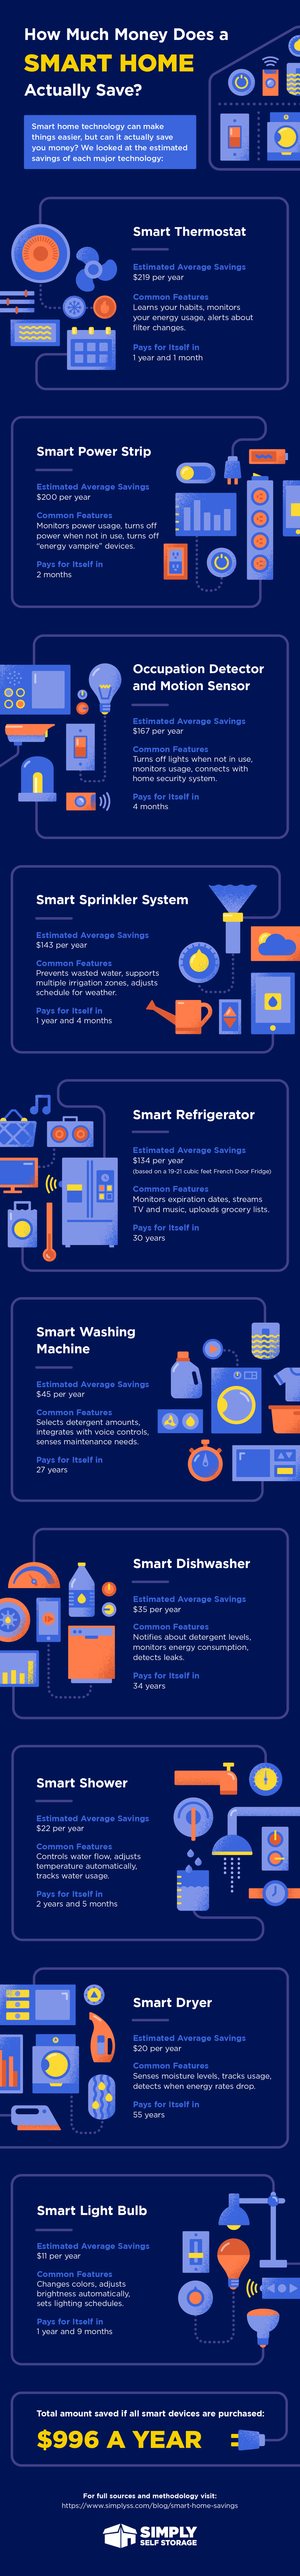 How Much Money Does a Smart Home Save